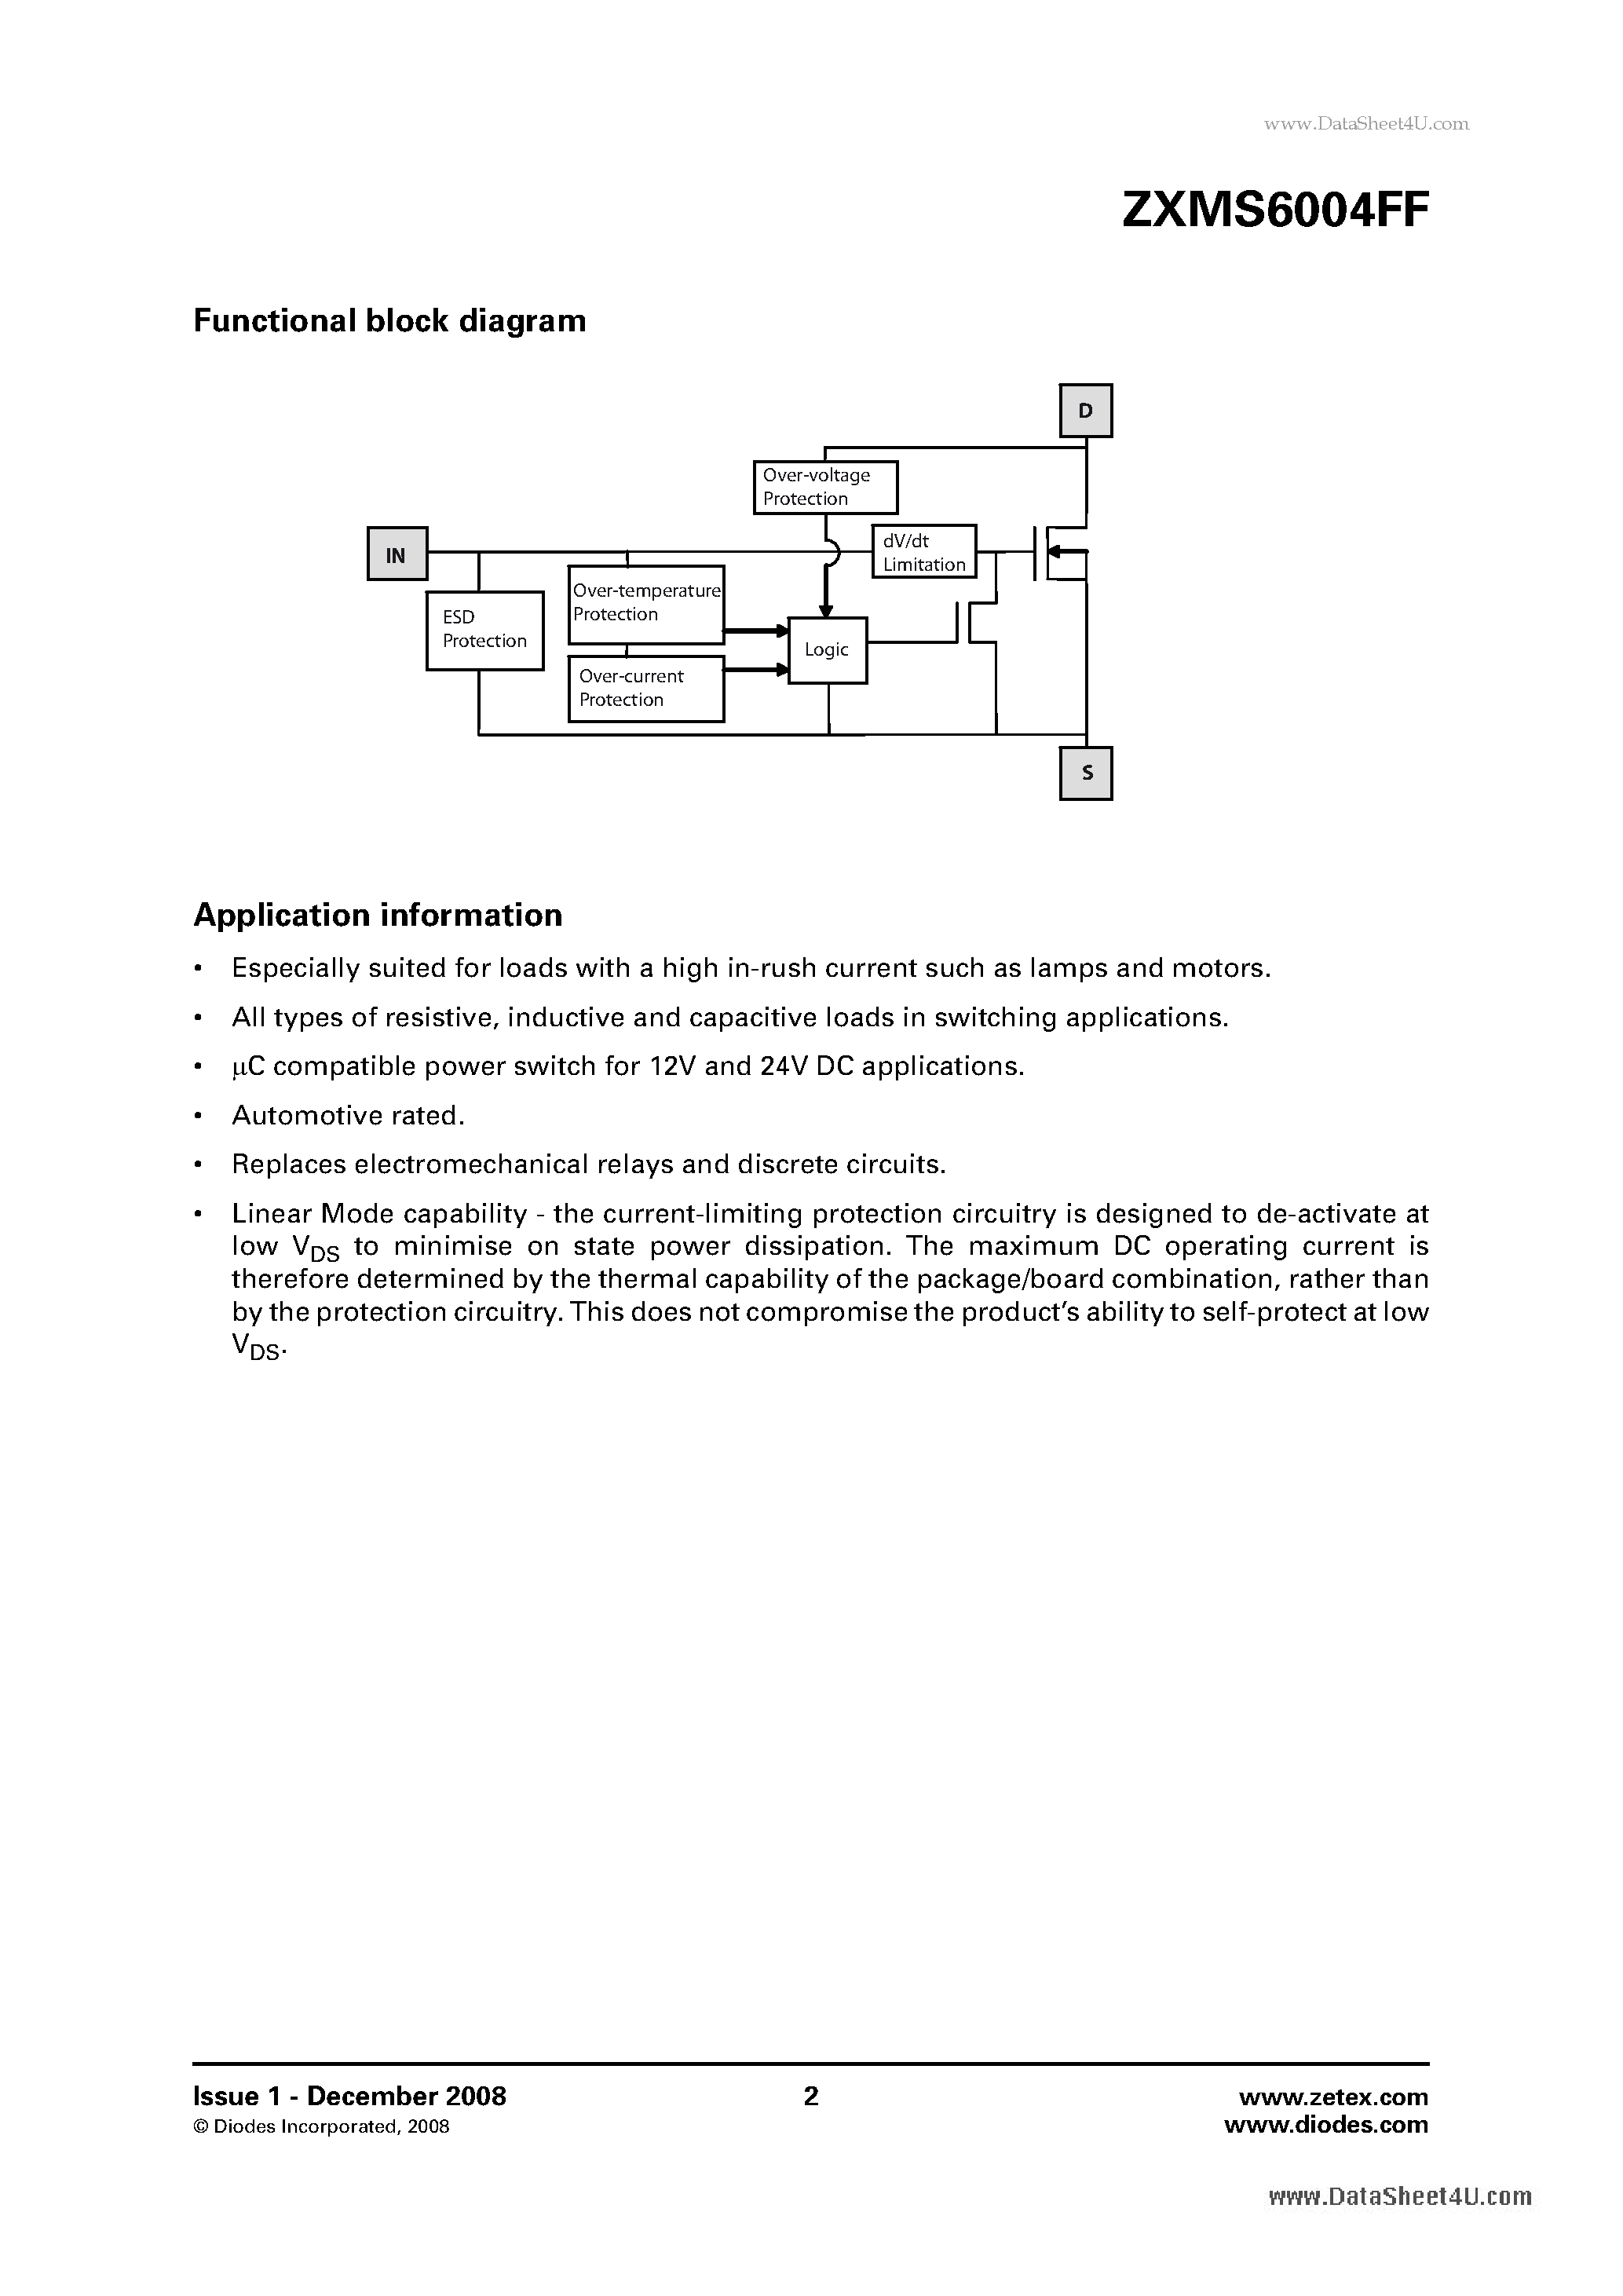 Datasheet ZXMS6004FF - 60V N-channel self protected enhancement mode Intellifet MOSFET page 2